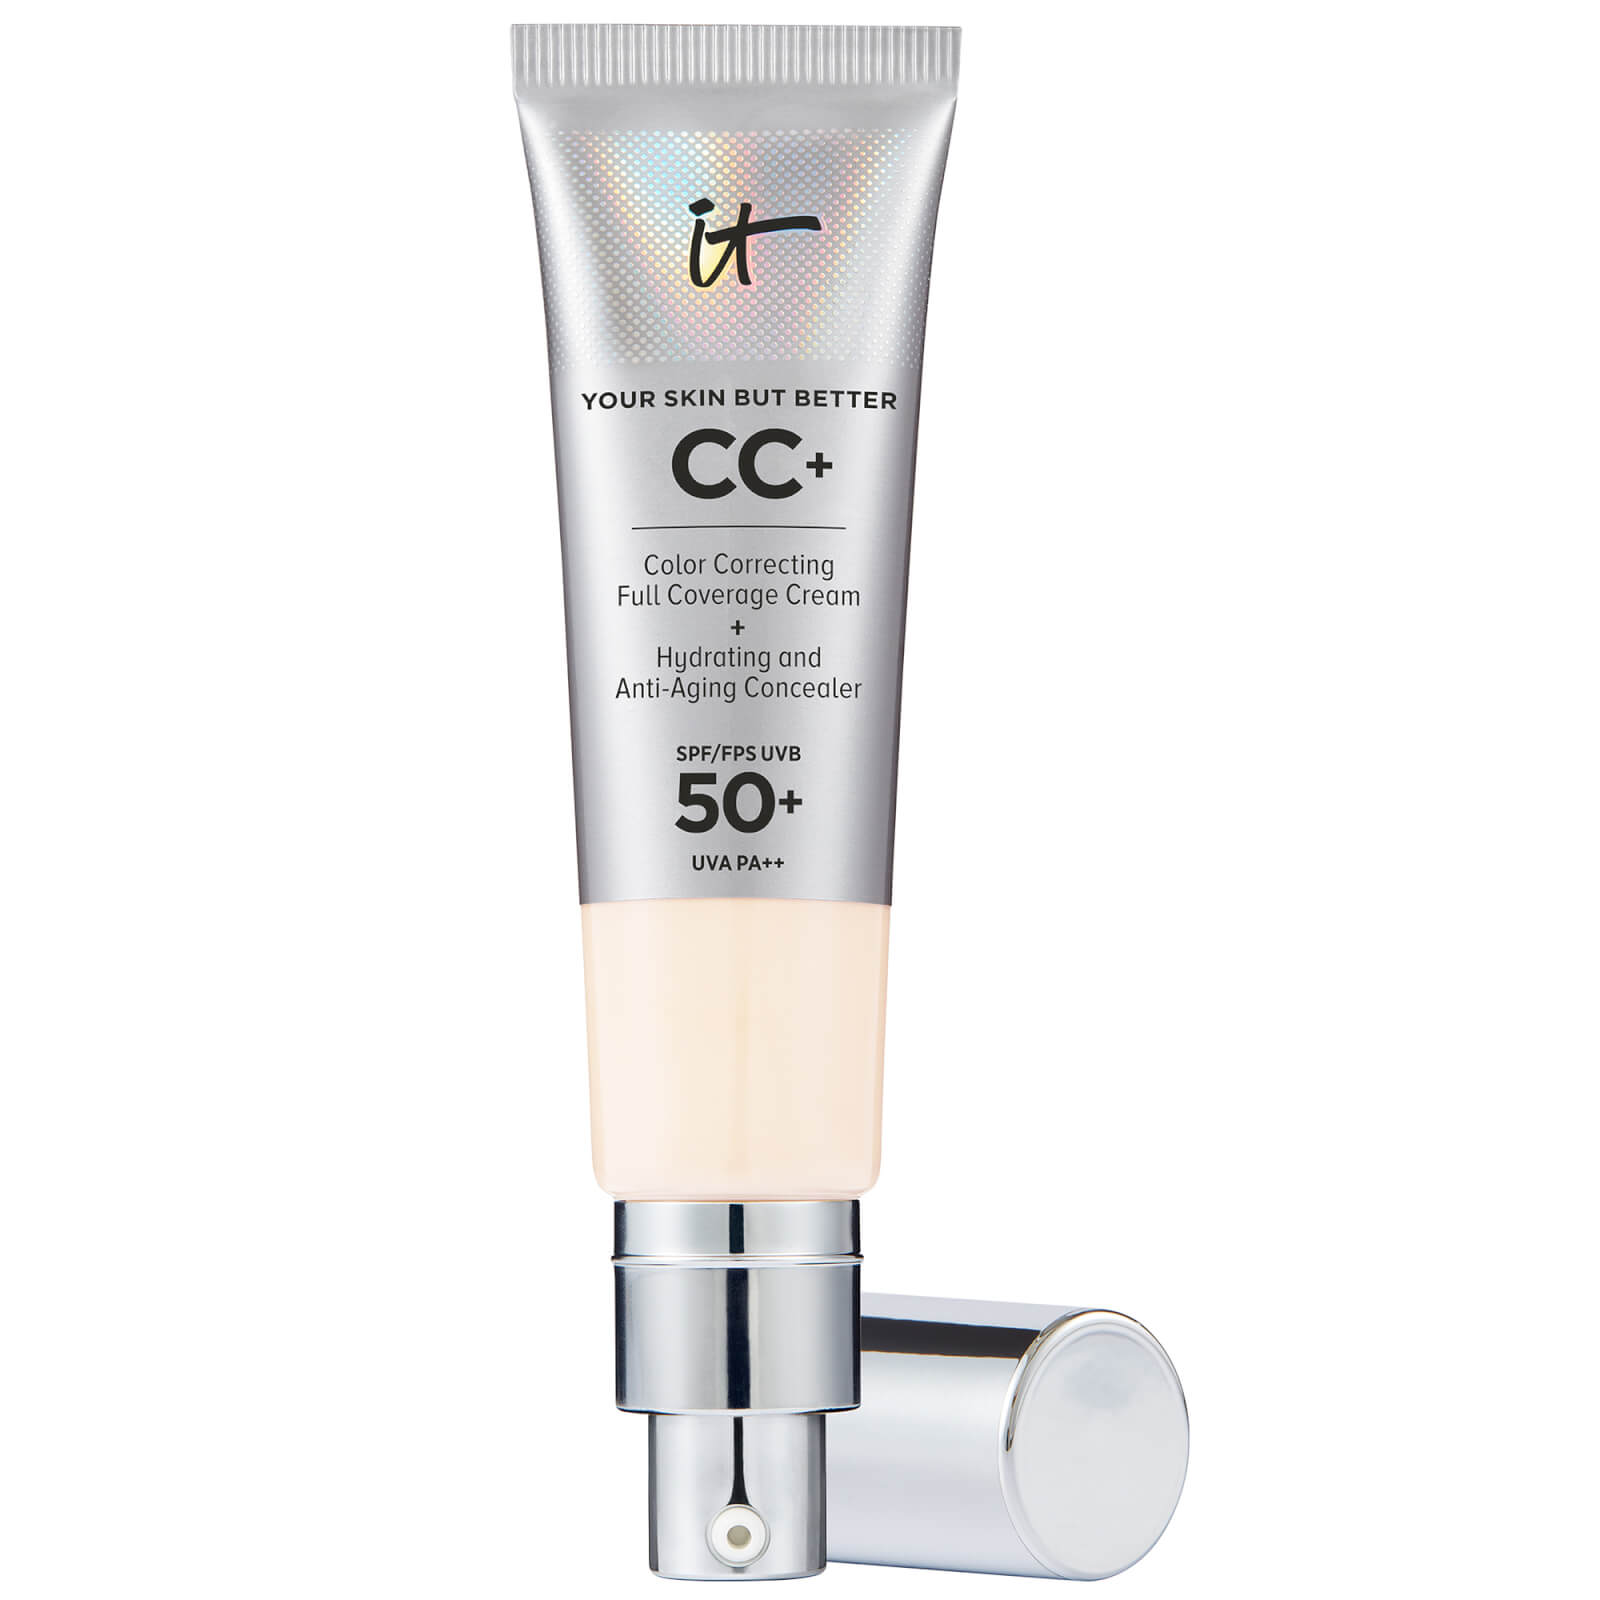 Image of IT Cosmetics Your Skin But Better CC+ Cream with SPF50 32ml (Various Shades) - Fair Porcelain